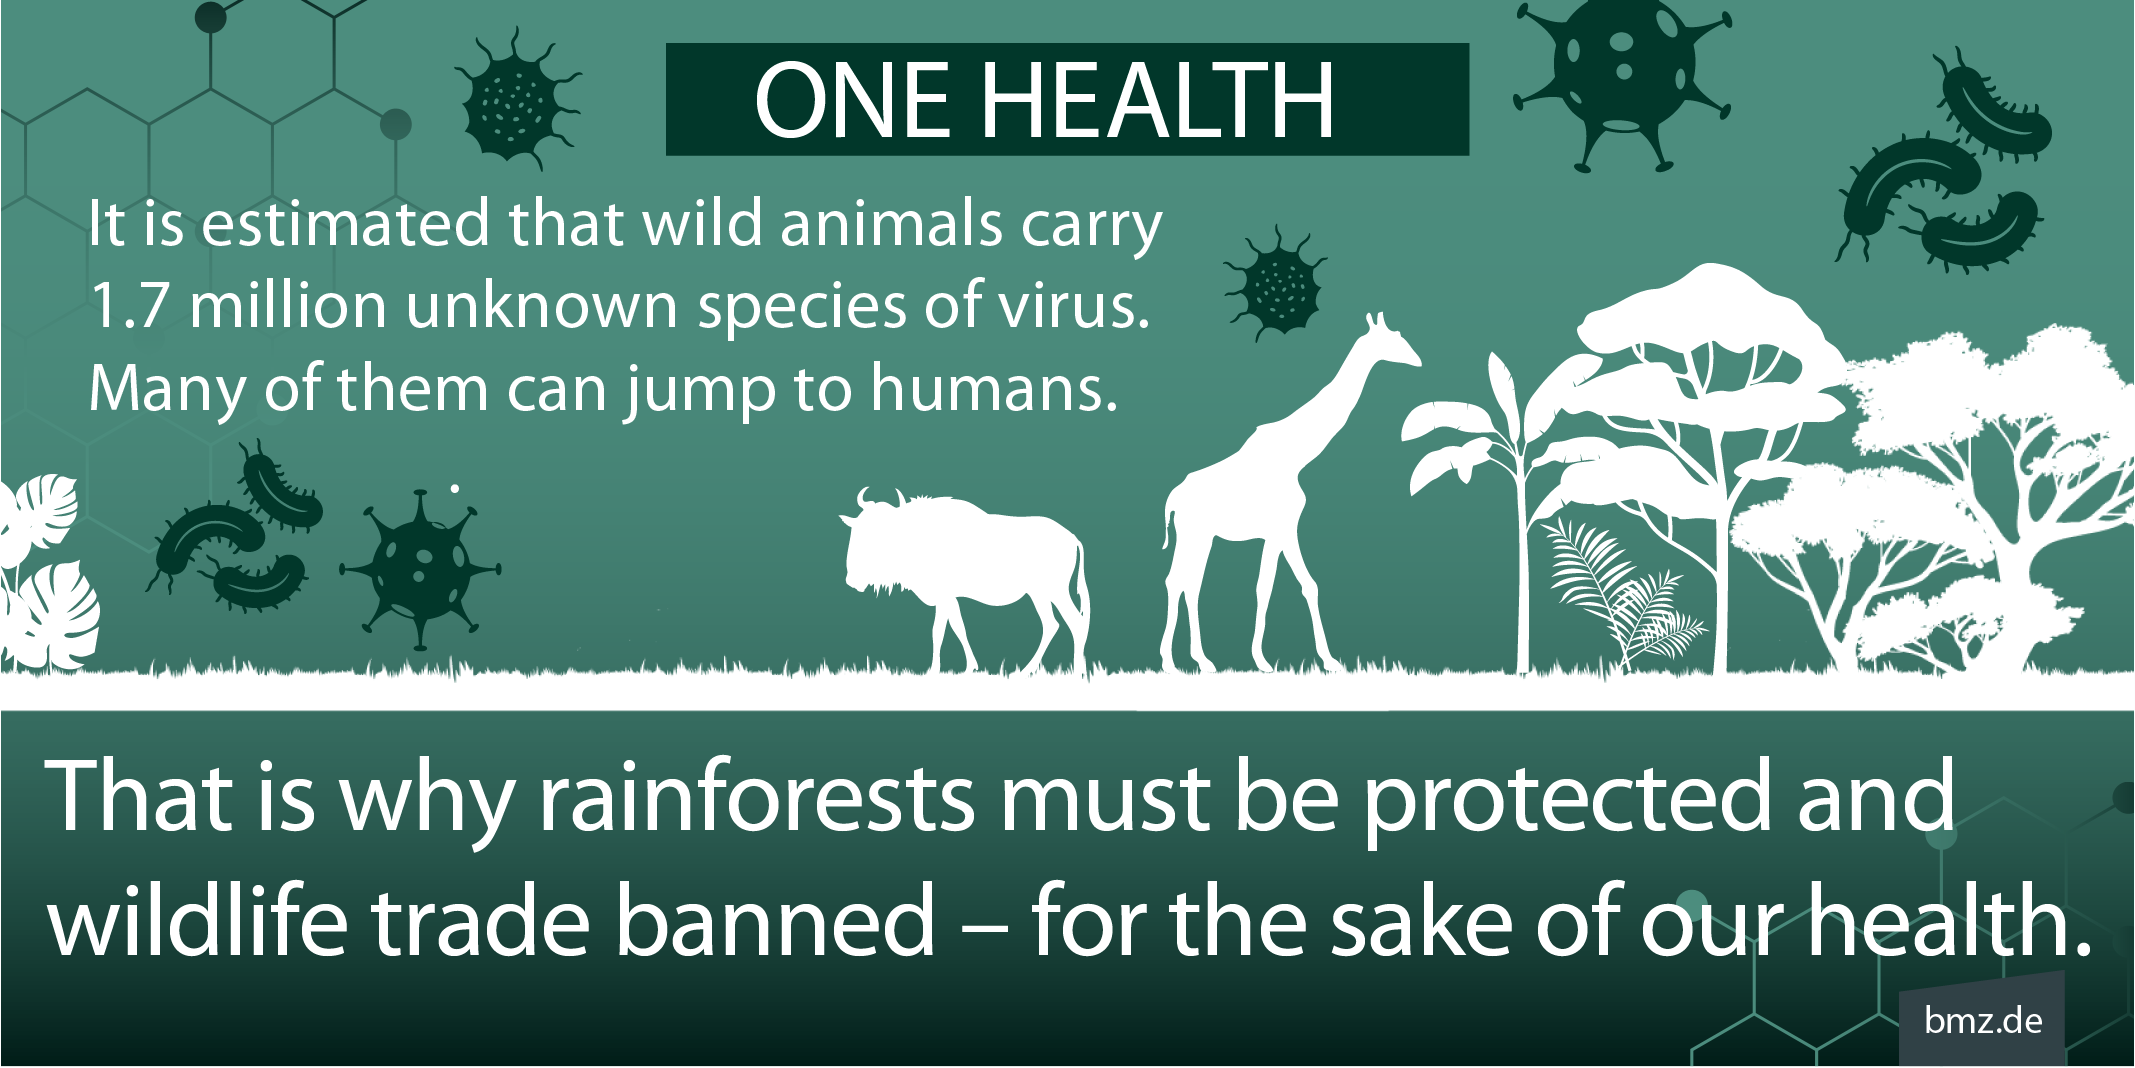 One Health: It is estimated that wild animals carry 1.7 million unknown species of virus. Many of them can jump to humans. That is why rainforests must be protected and wildlife trade banned – for the sake of our health.